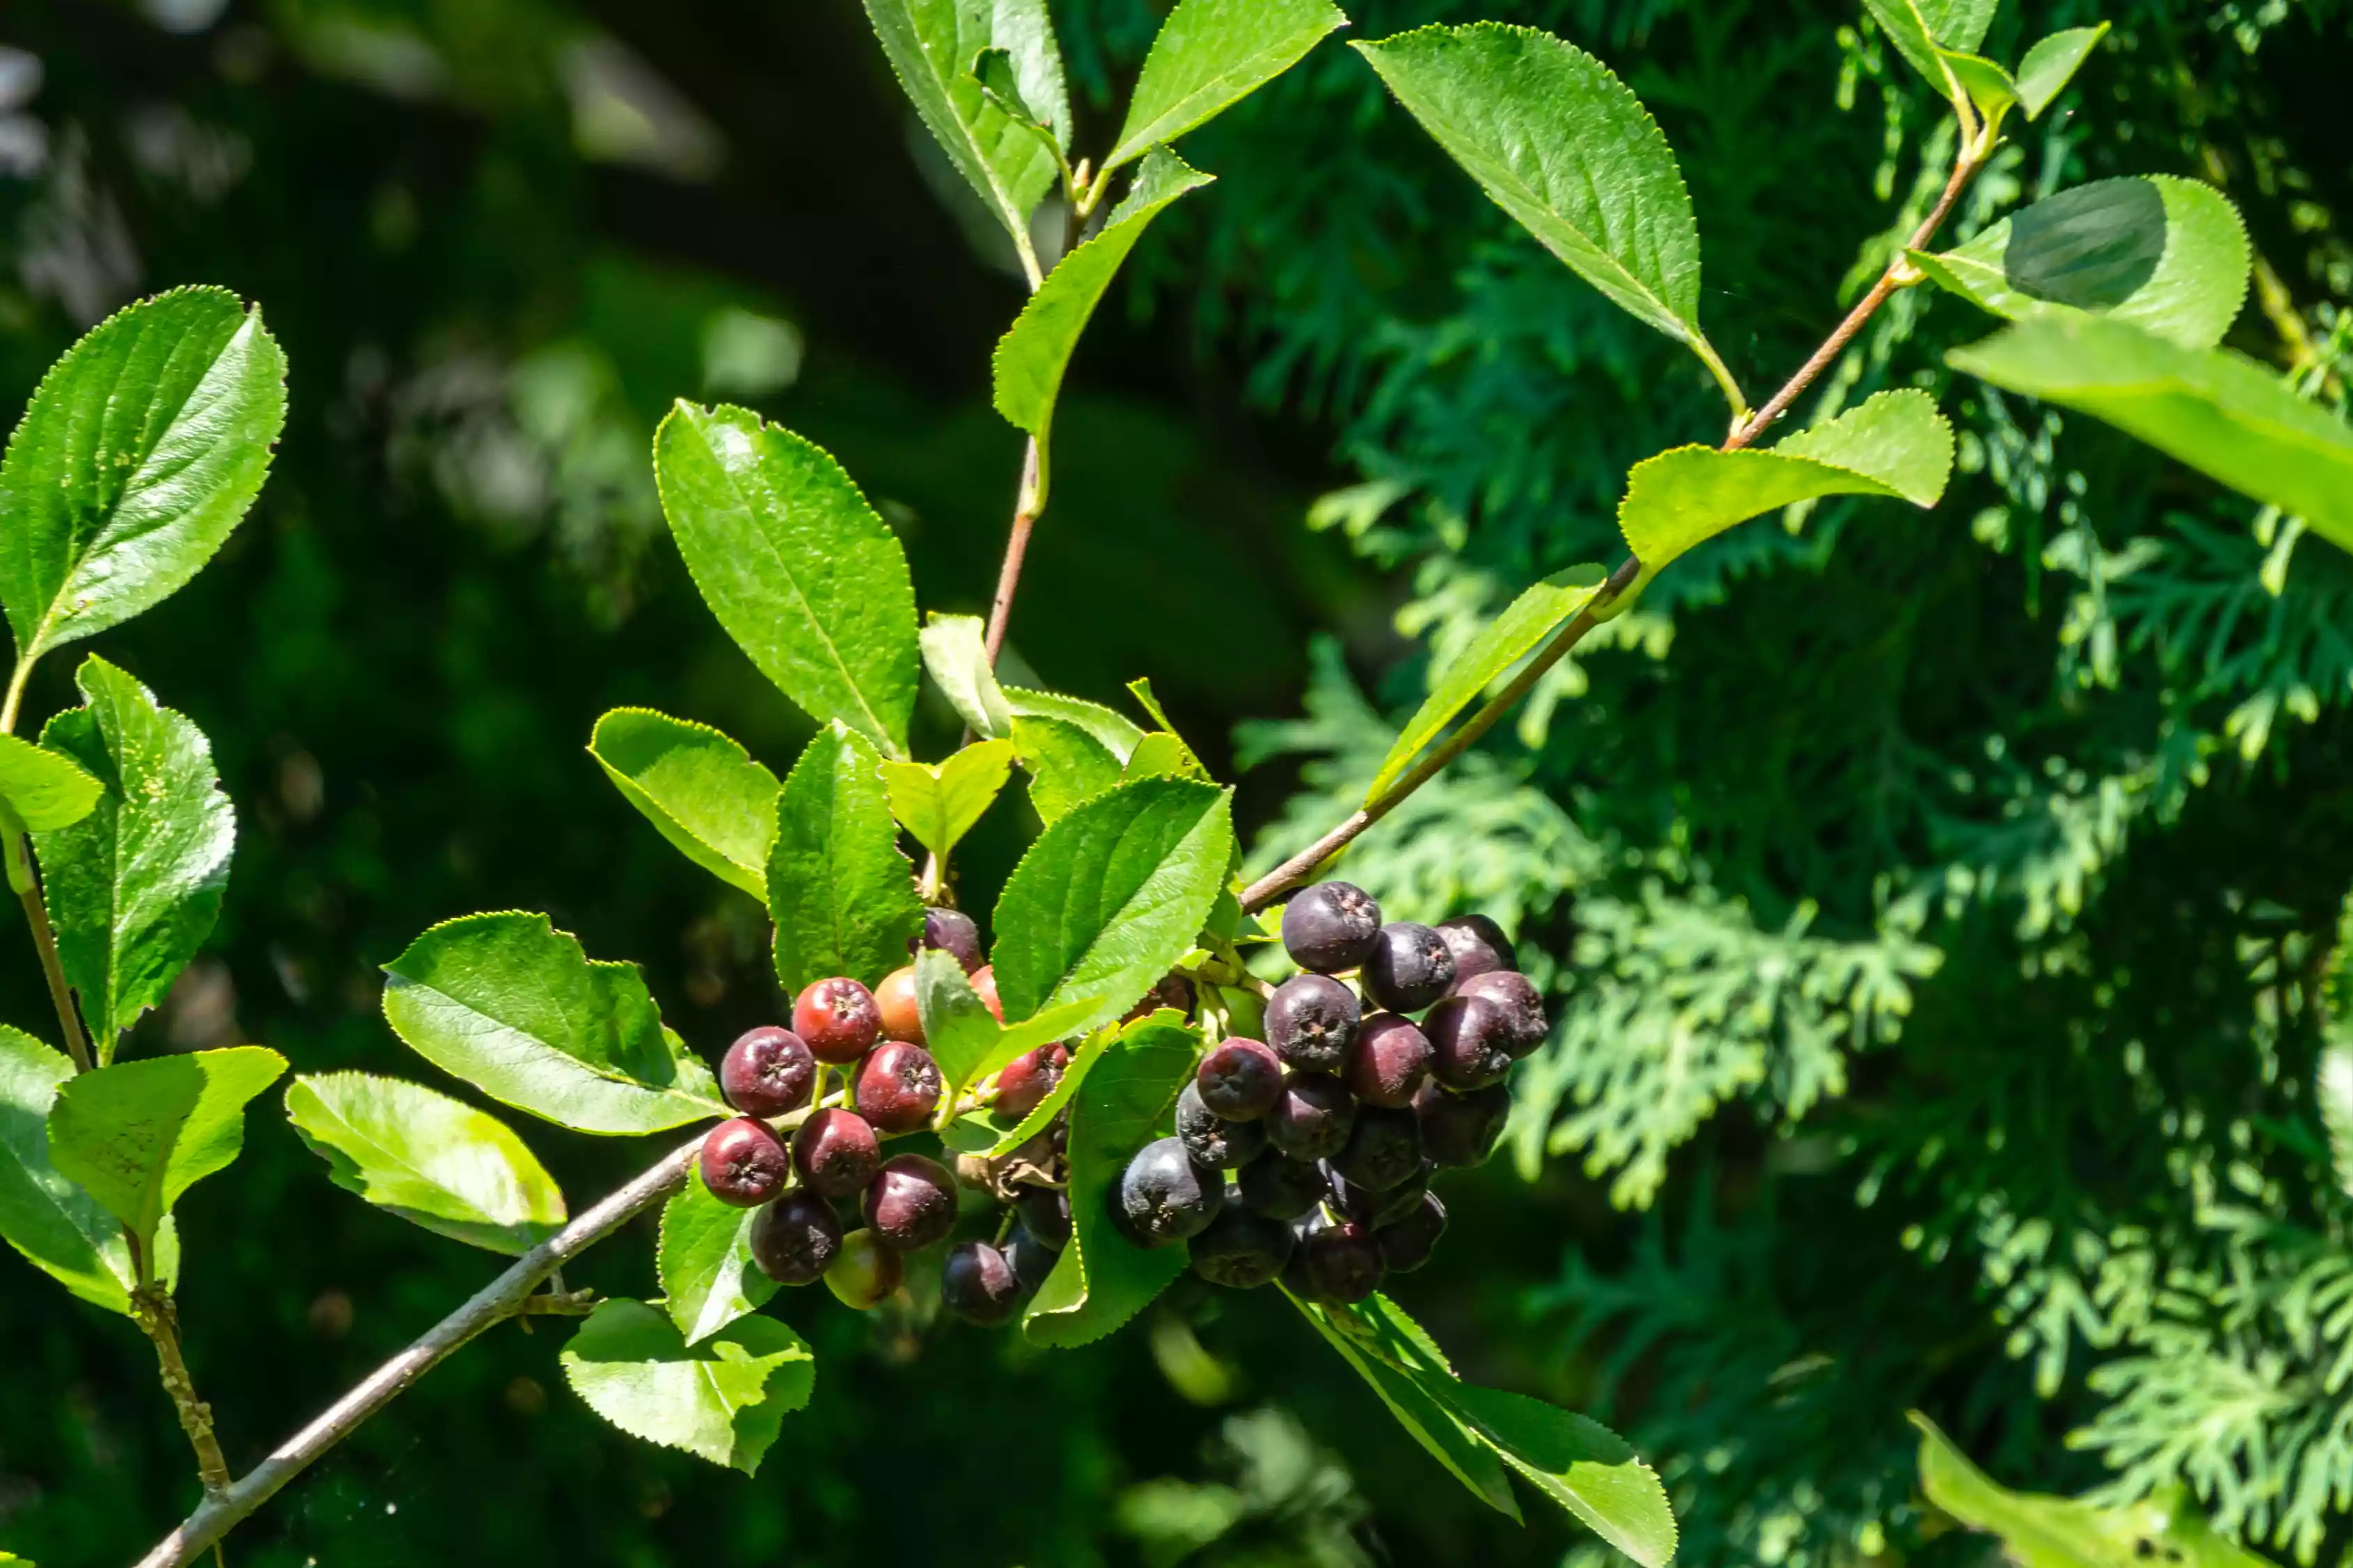 Canadian serviceberry plant with dark red and purple berries